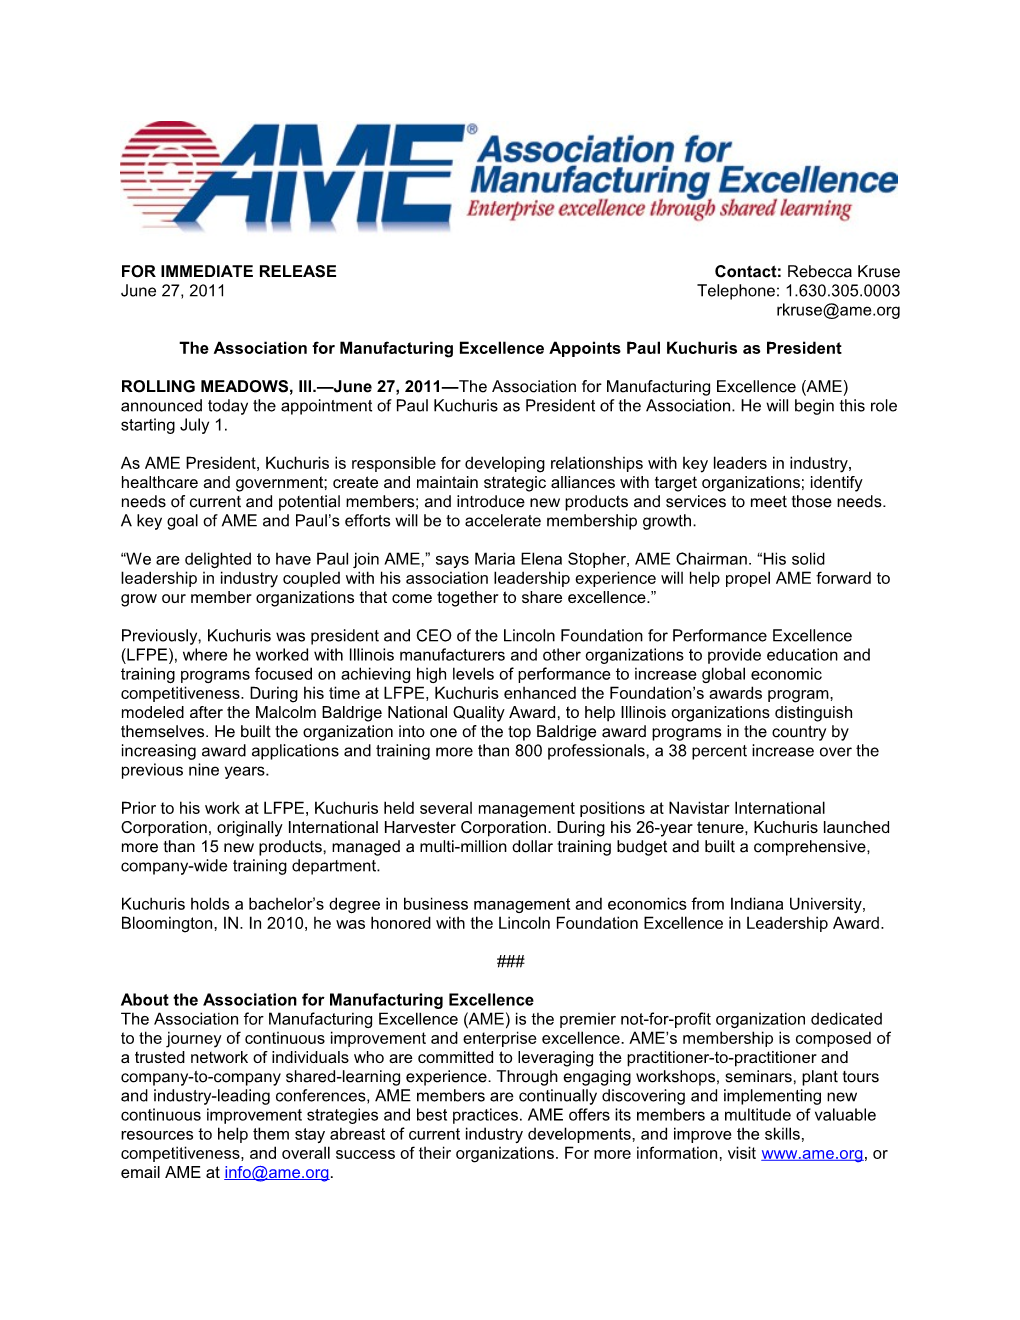 The Association for Manufacturing Excellence Appoints Paul Kuchuris As President